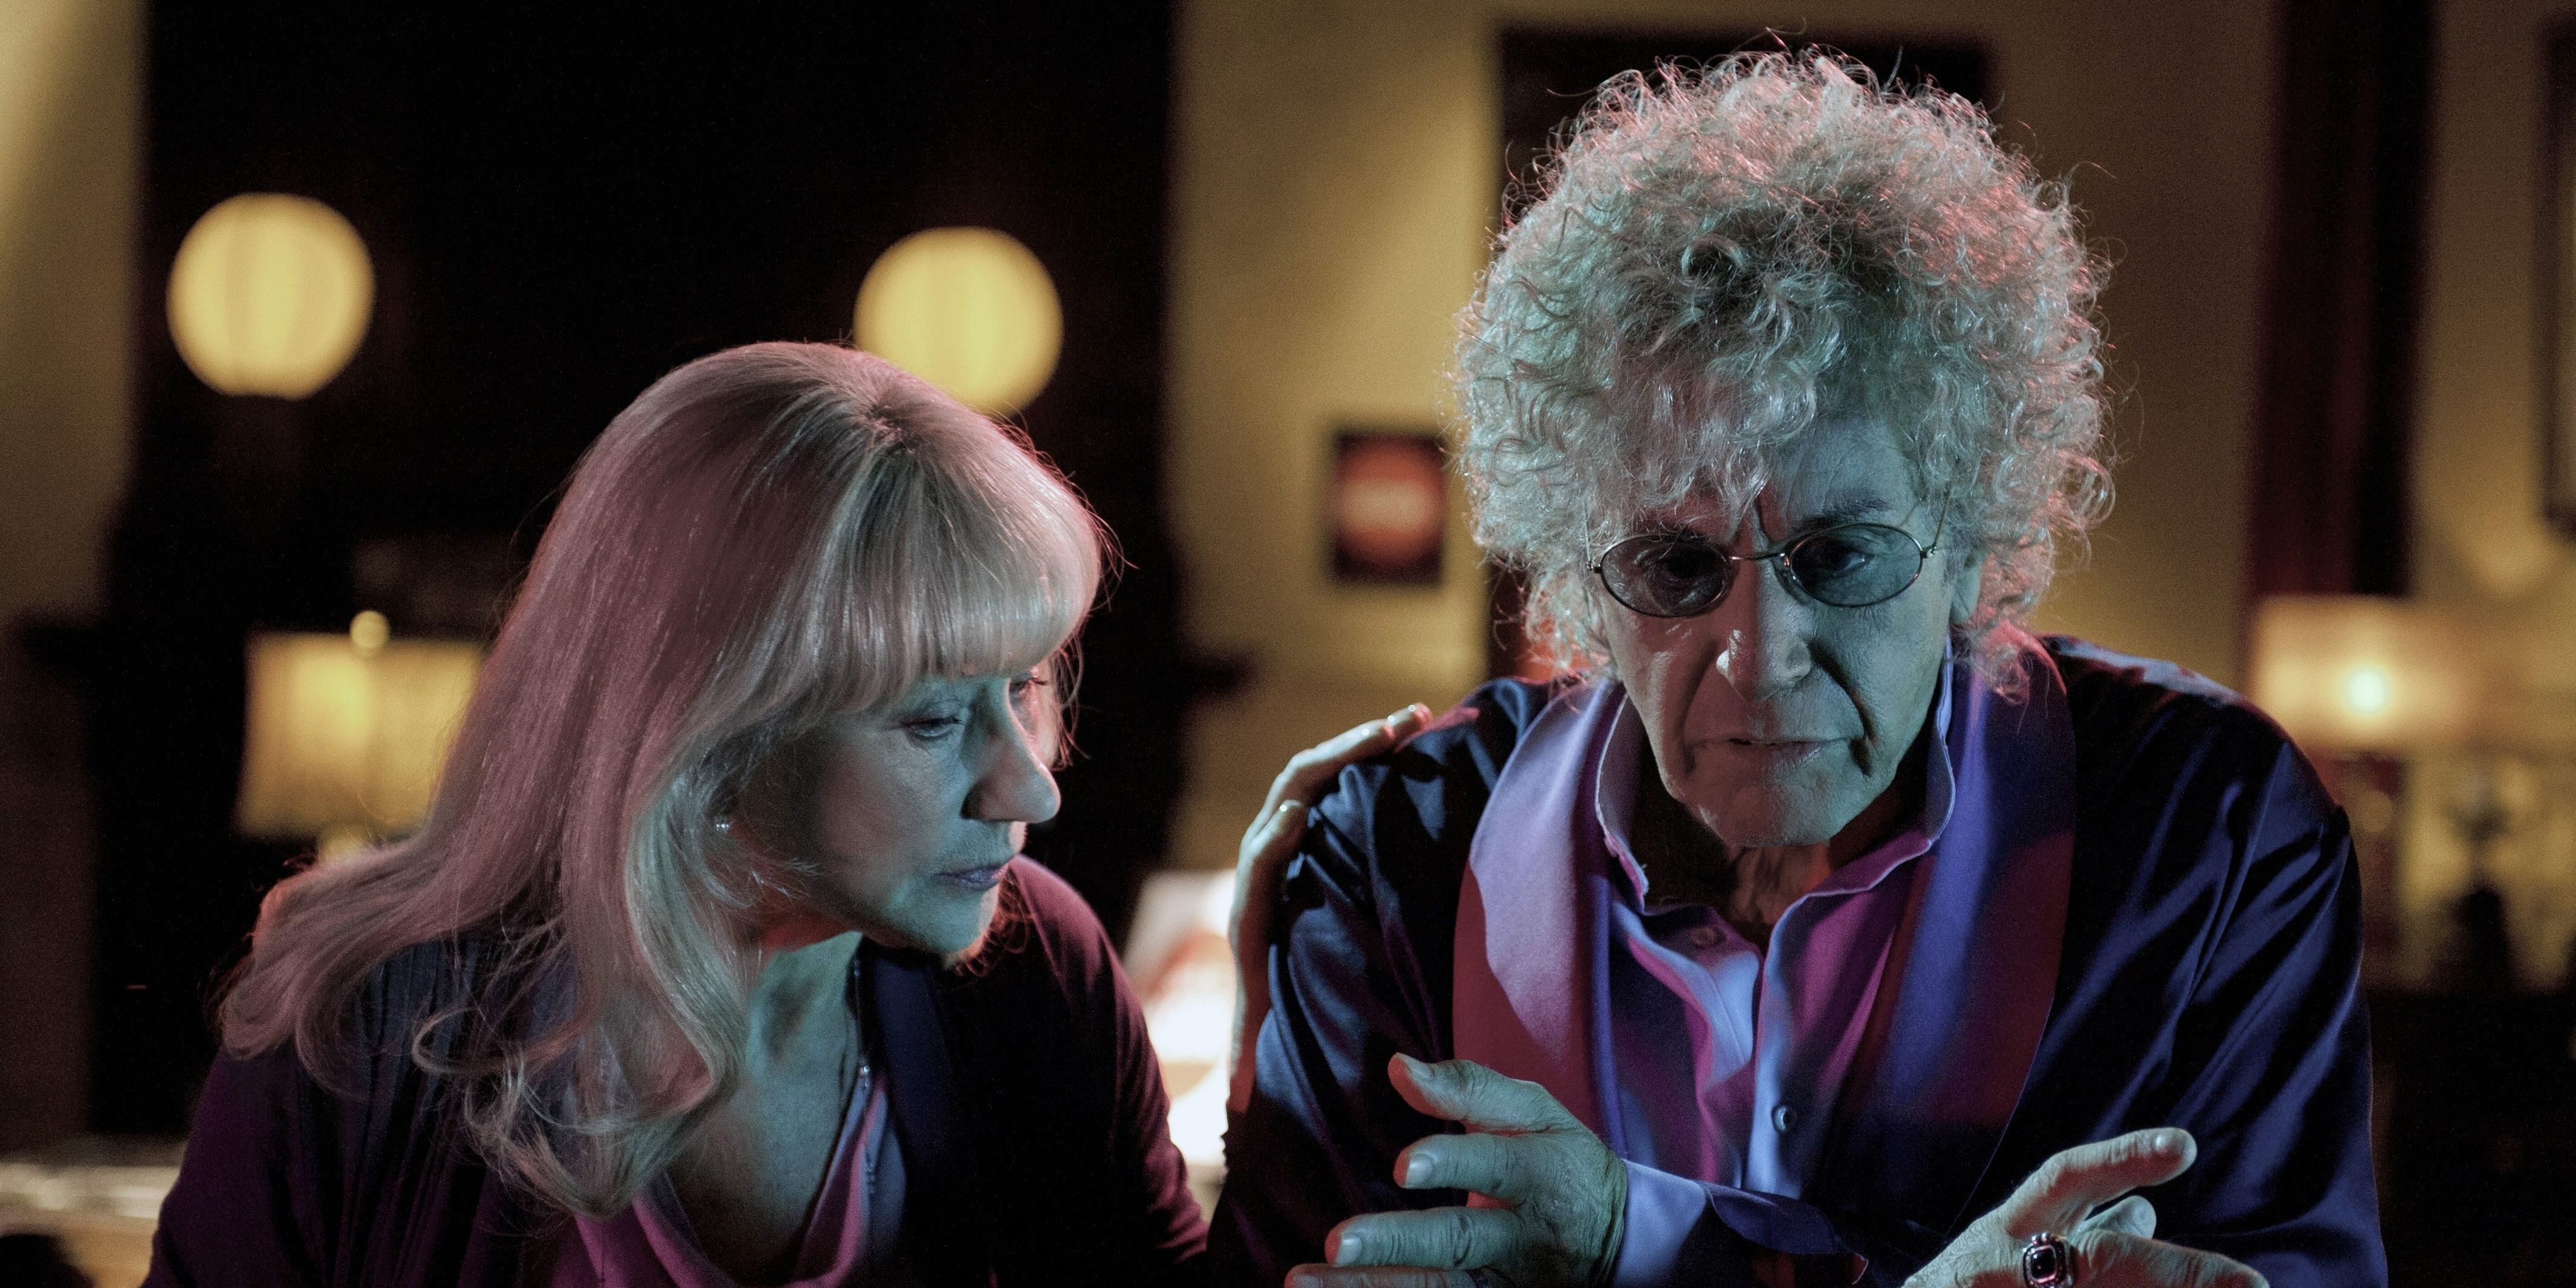 Al Pacino as Phil Spector with a woman looking at him